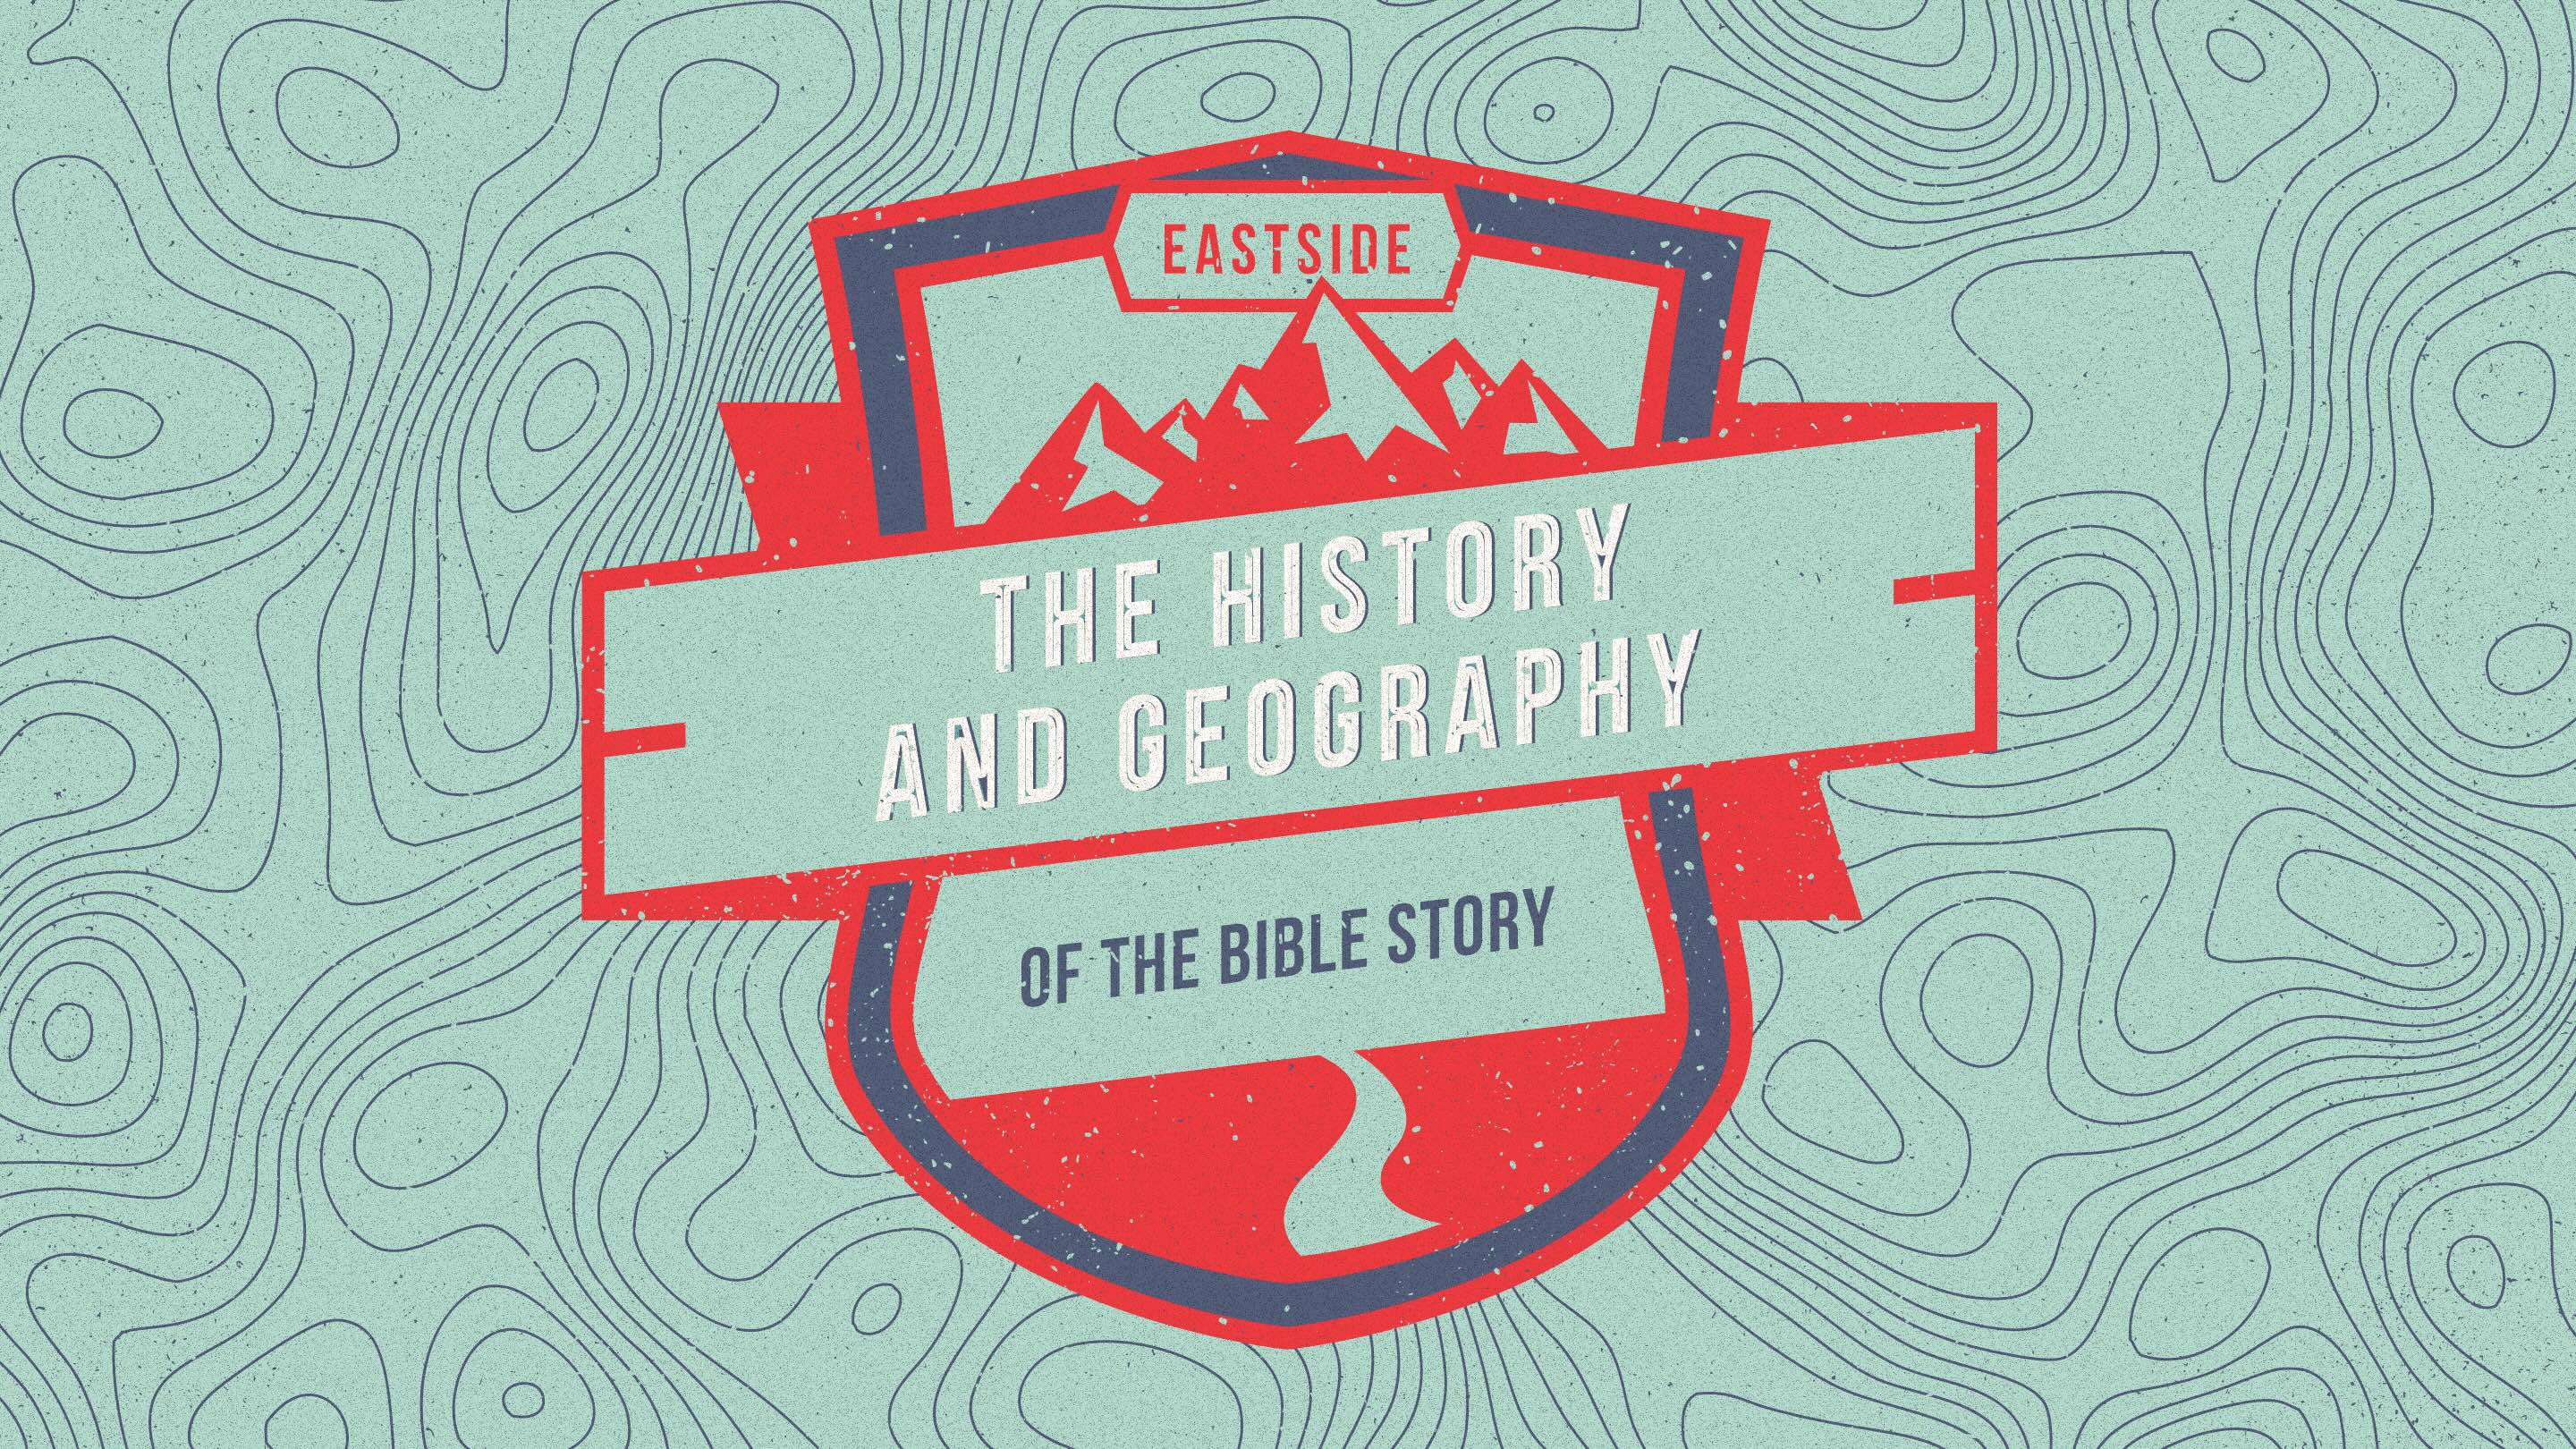 The History & Geography of the Bible Story (13)